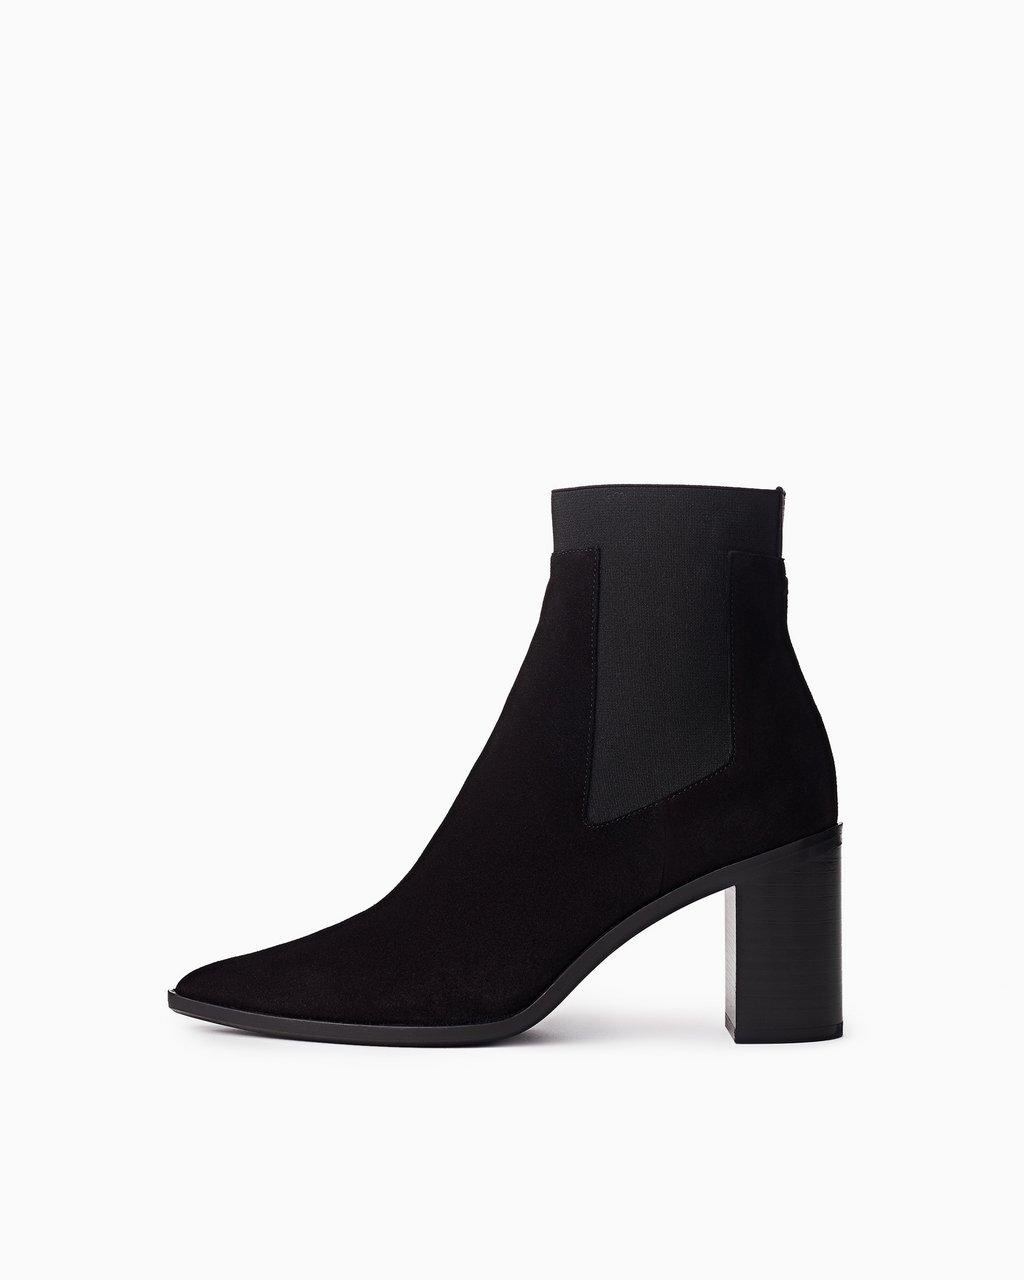 Best Black Boots on Sale Now: Shop Marked-Down Styles From Steve Madden ...